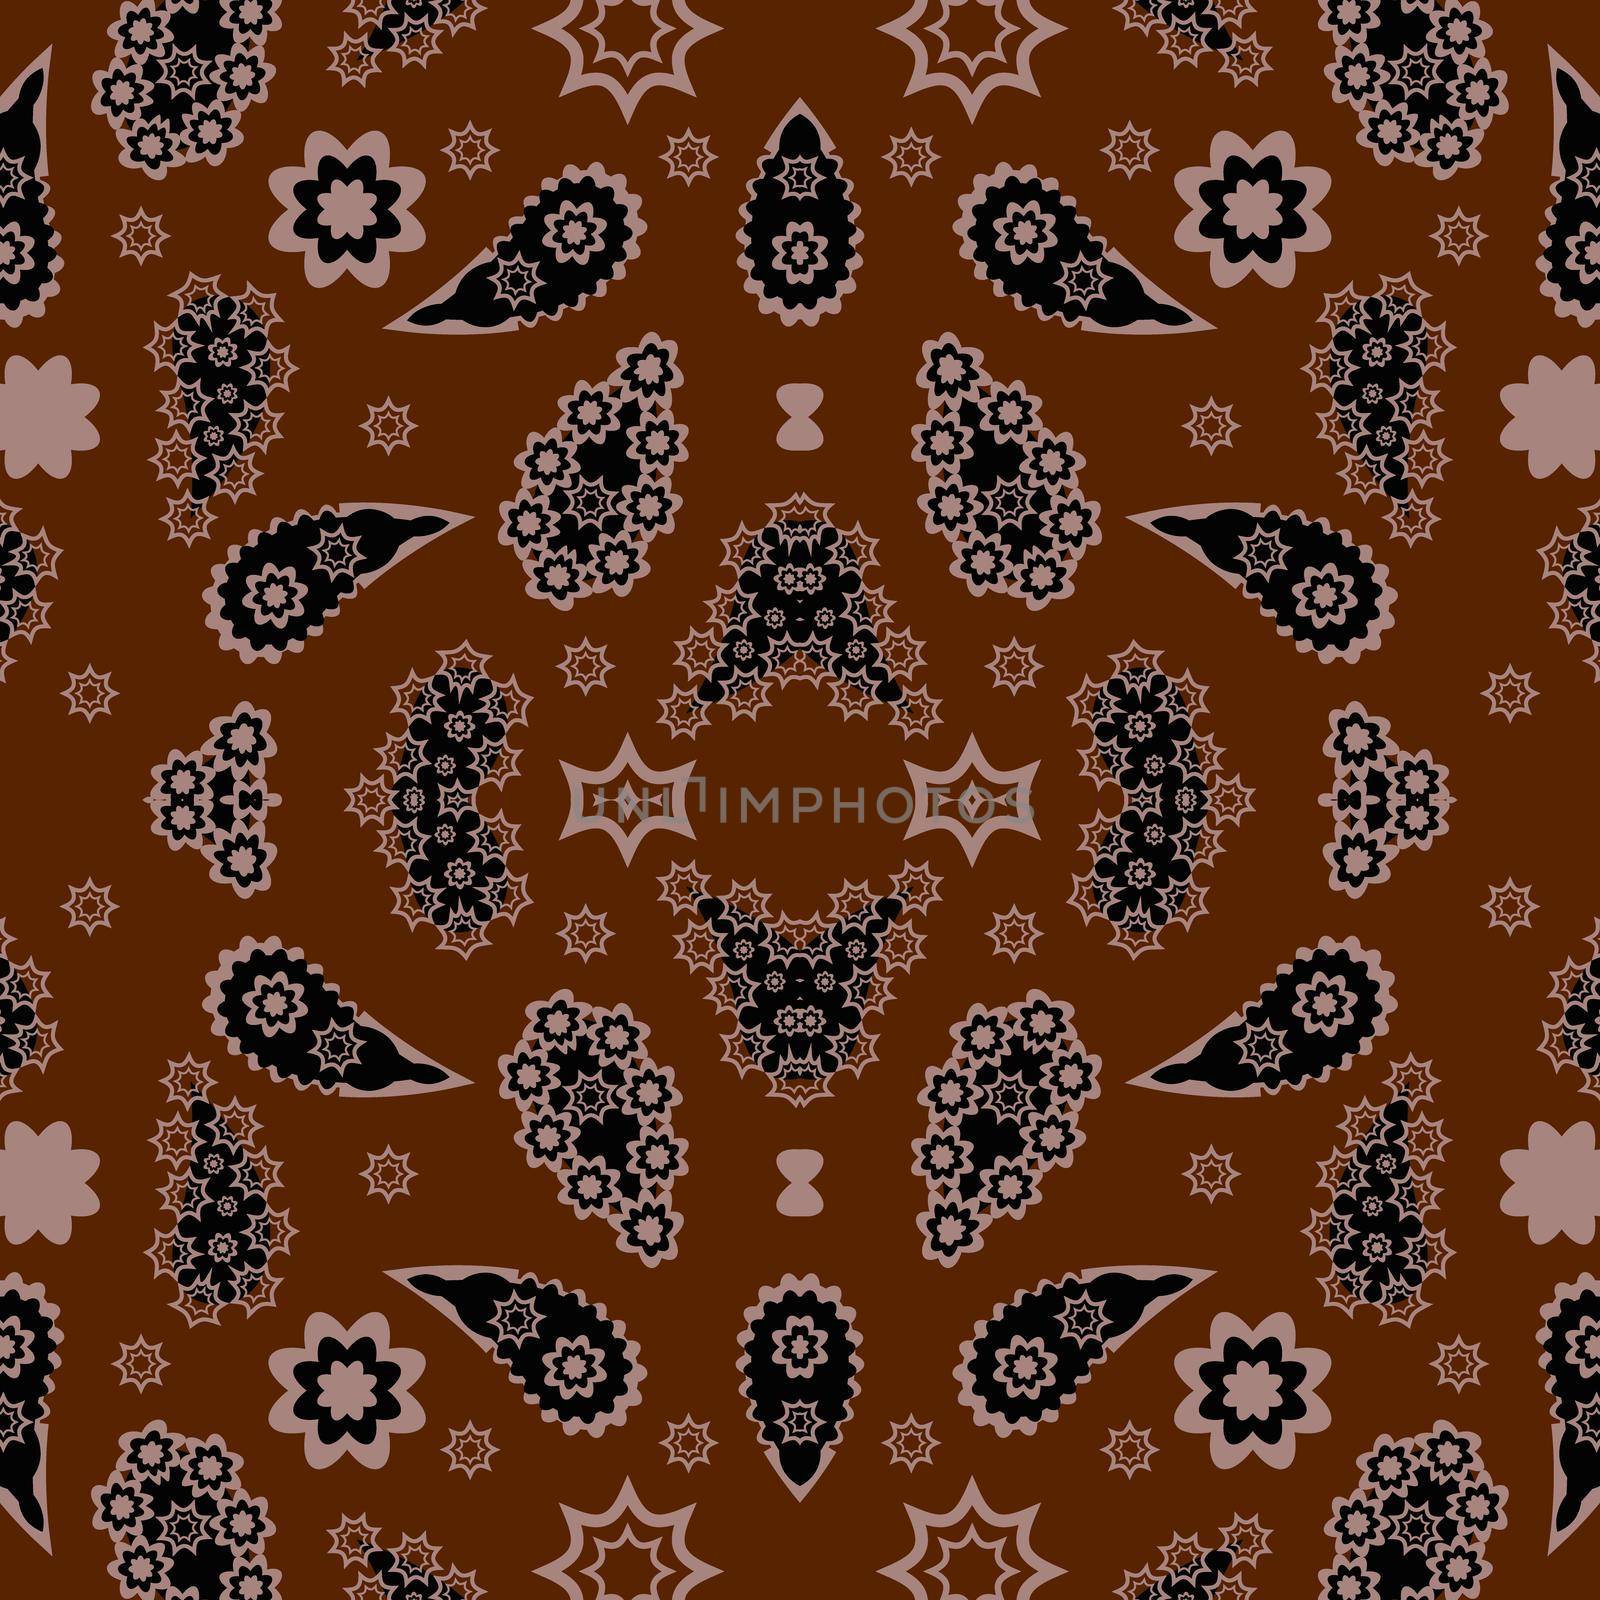 Floral pattern paisley style by eskimos